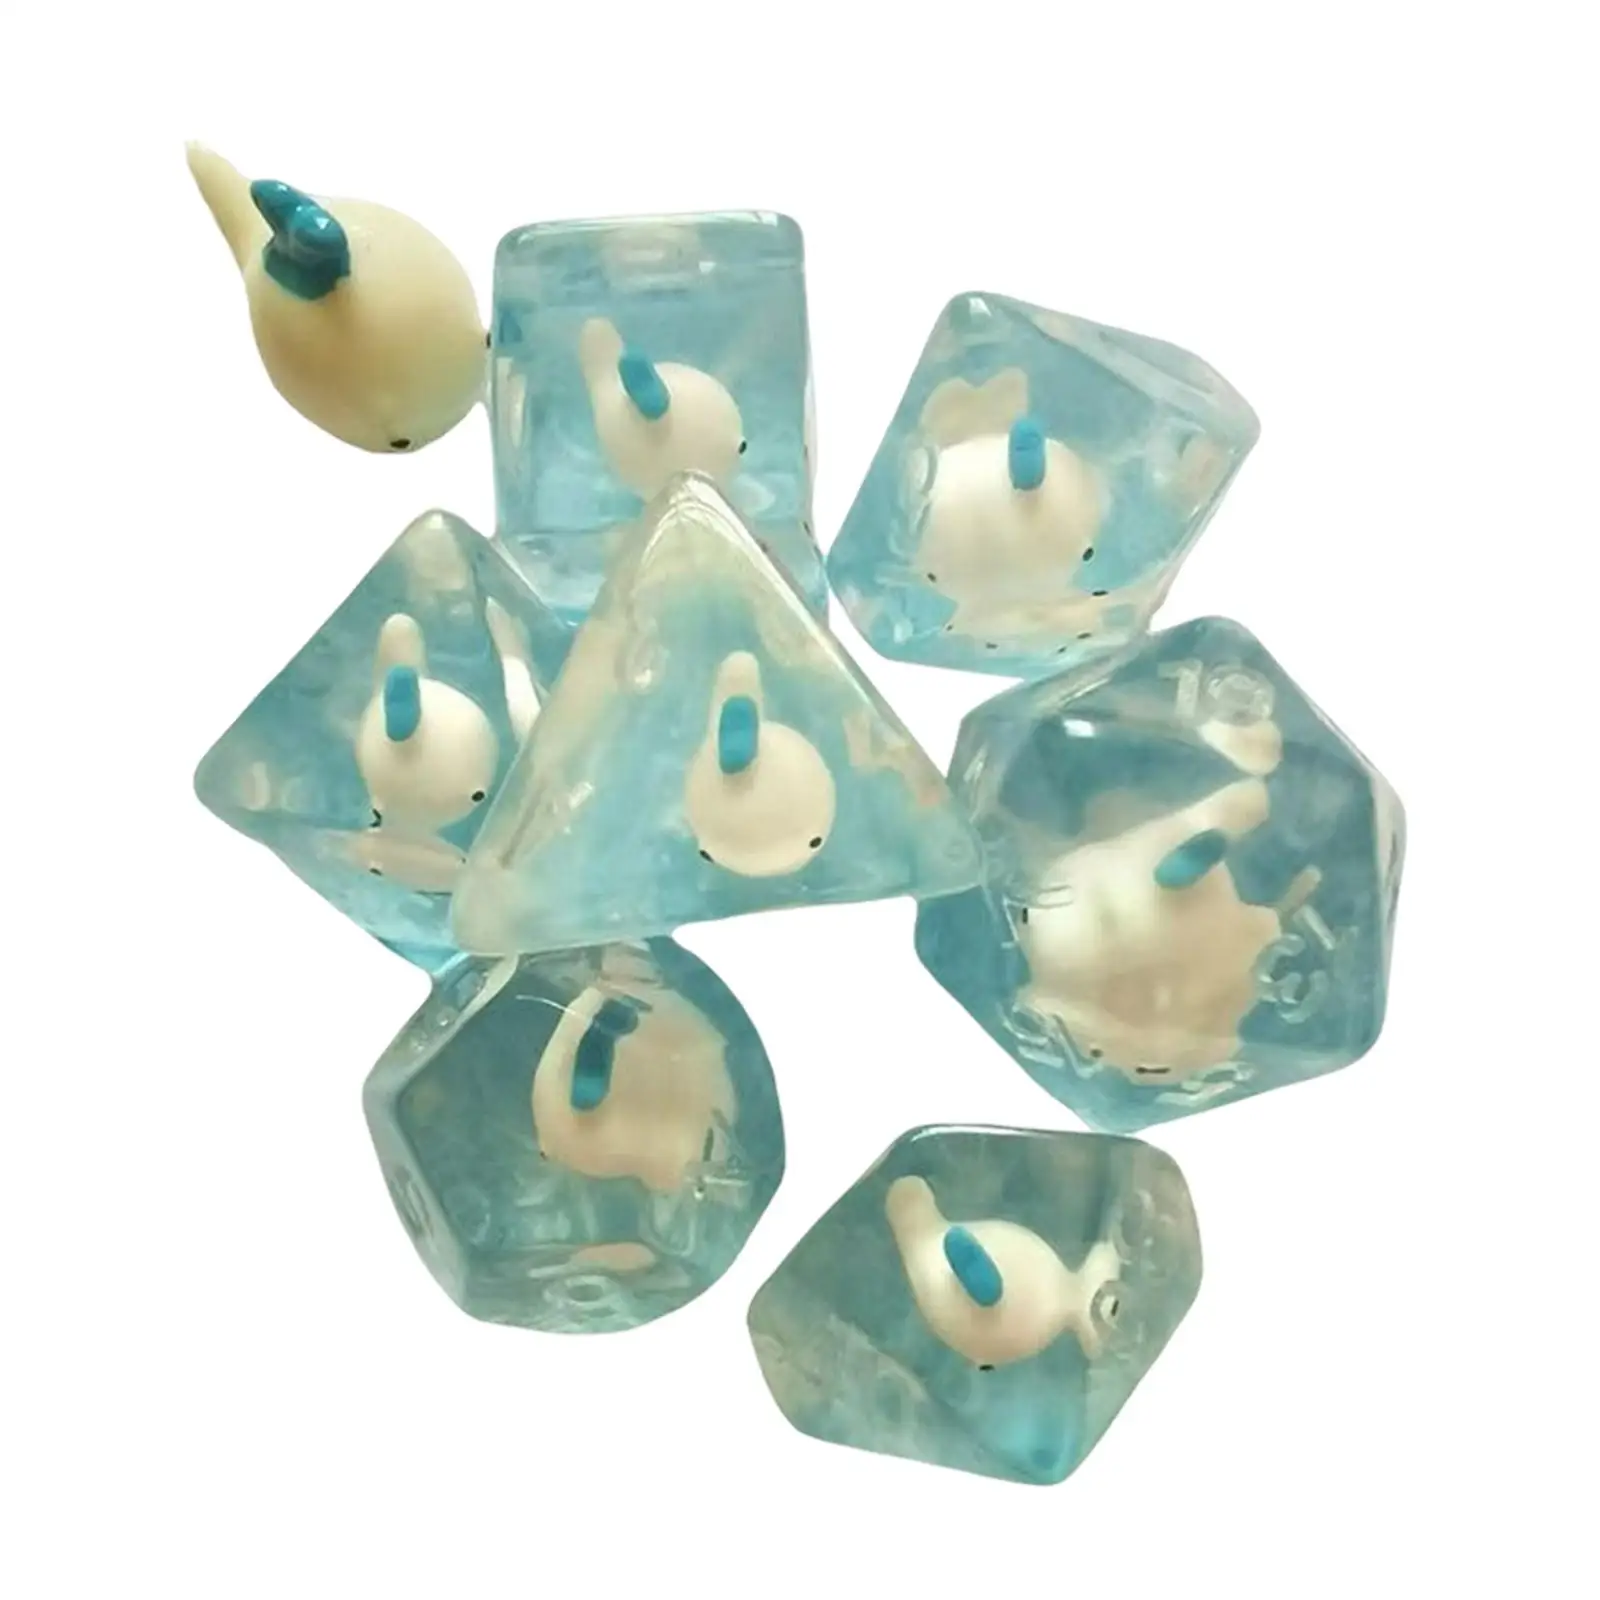 7Pcs Polyhedral dices with Animal Dolphin Table Game Dices D6 D4 D8 D10 D12 D20 for Board game Favors Role Play Drinking Prop